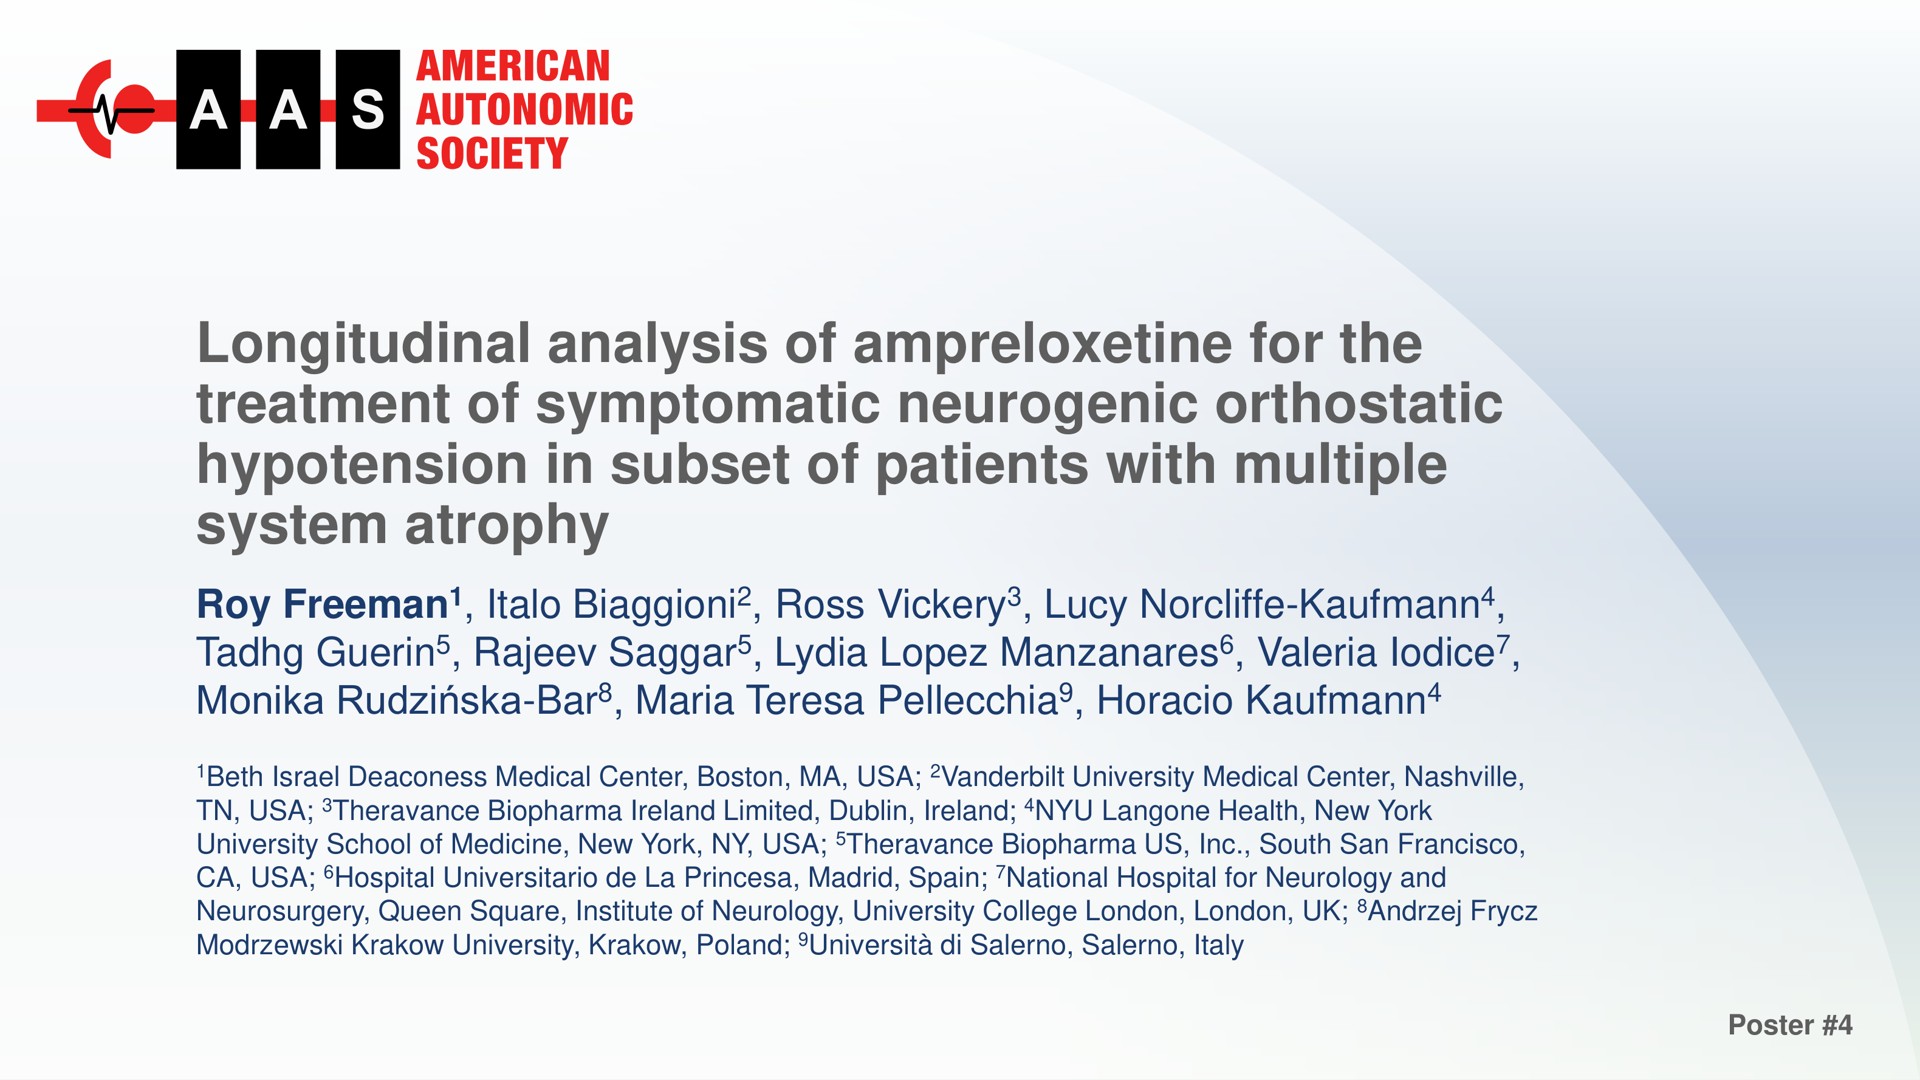 longitudinal analysis of for the treatment of symptomatic neurogenic orthostatic hypotension in subset of patients with multiple system atrophy | Theravance Biopharma